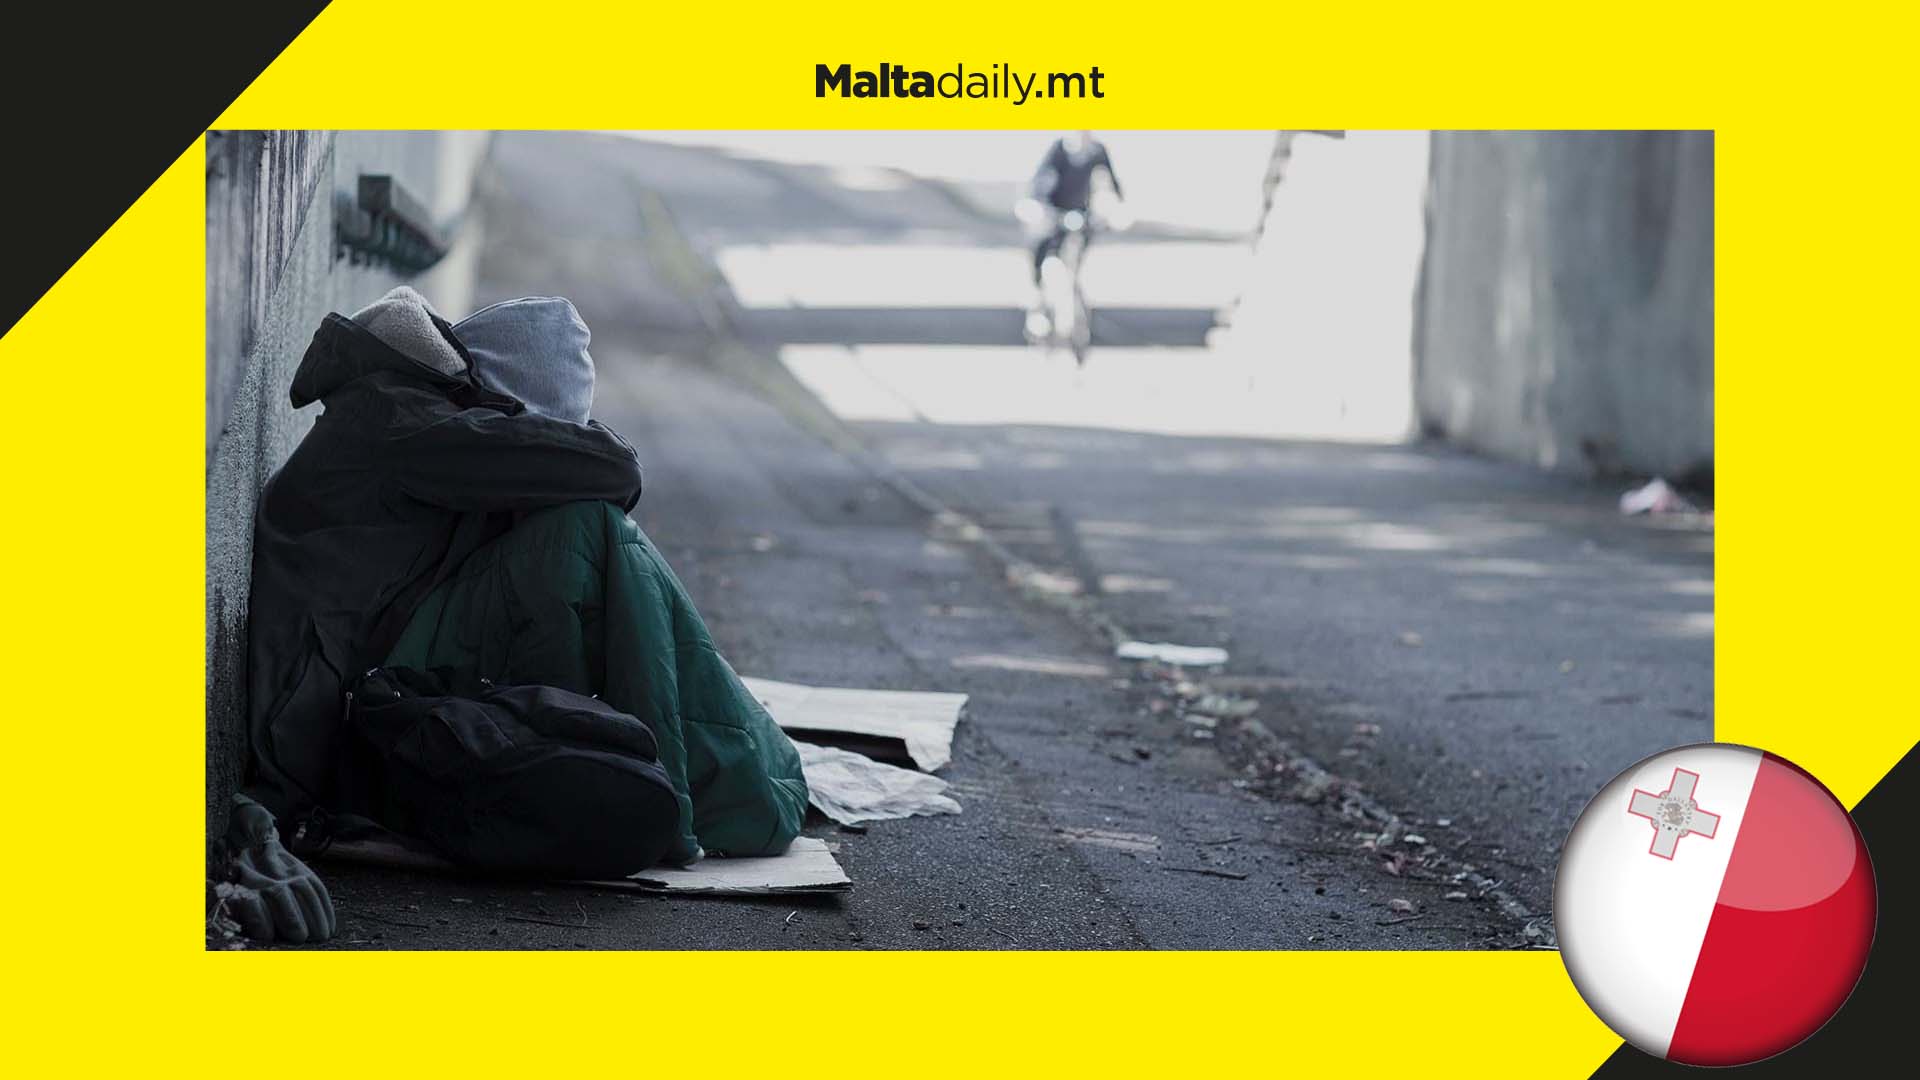 Maltese make up 52% of homeless people on the island